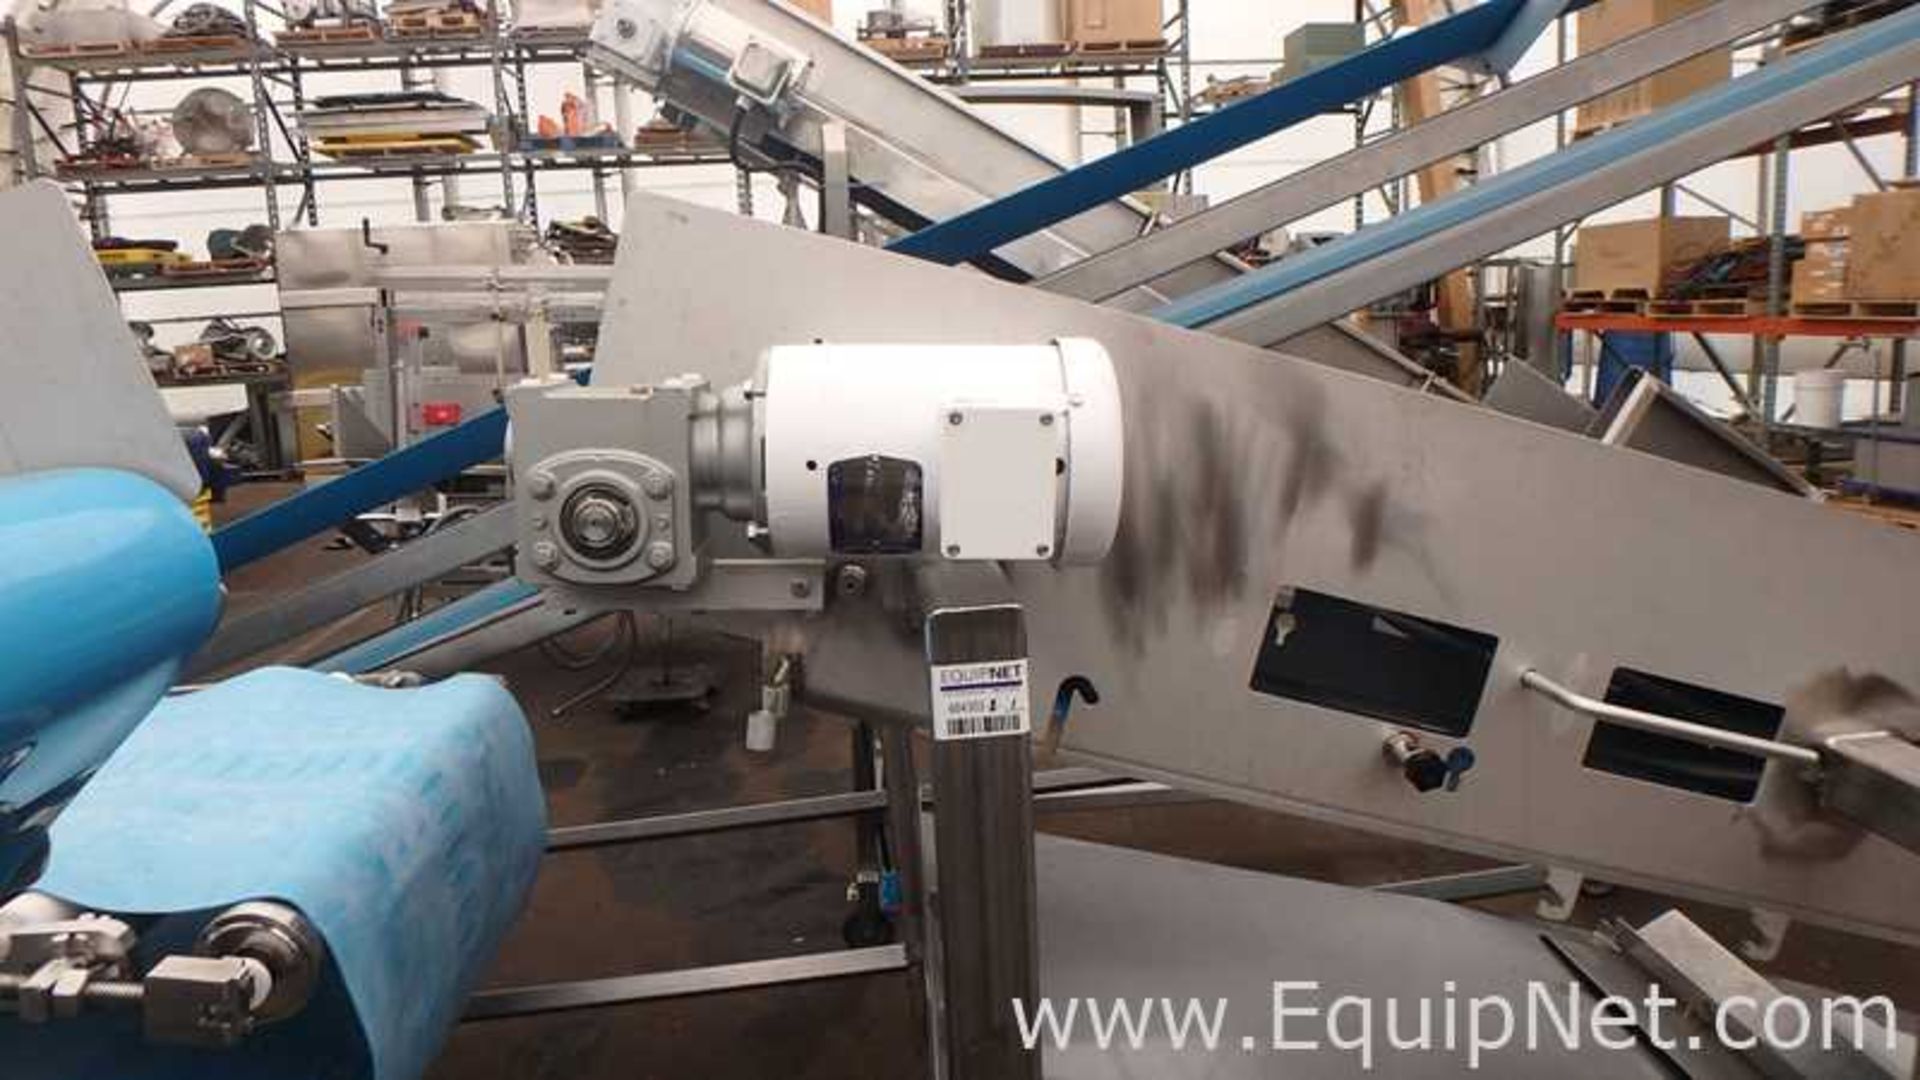 Stainless Steel Bulk Transfer Conveyor 16 Inches Wide With Small Decline - Image 2 of 6